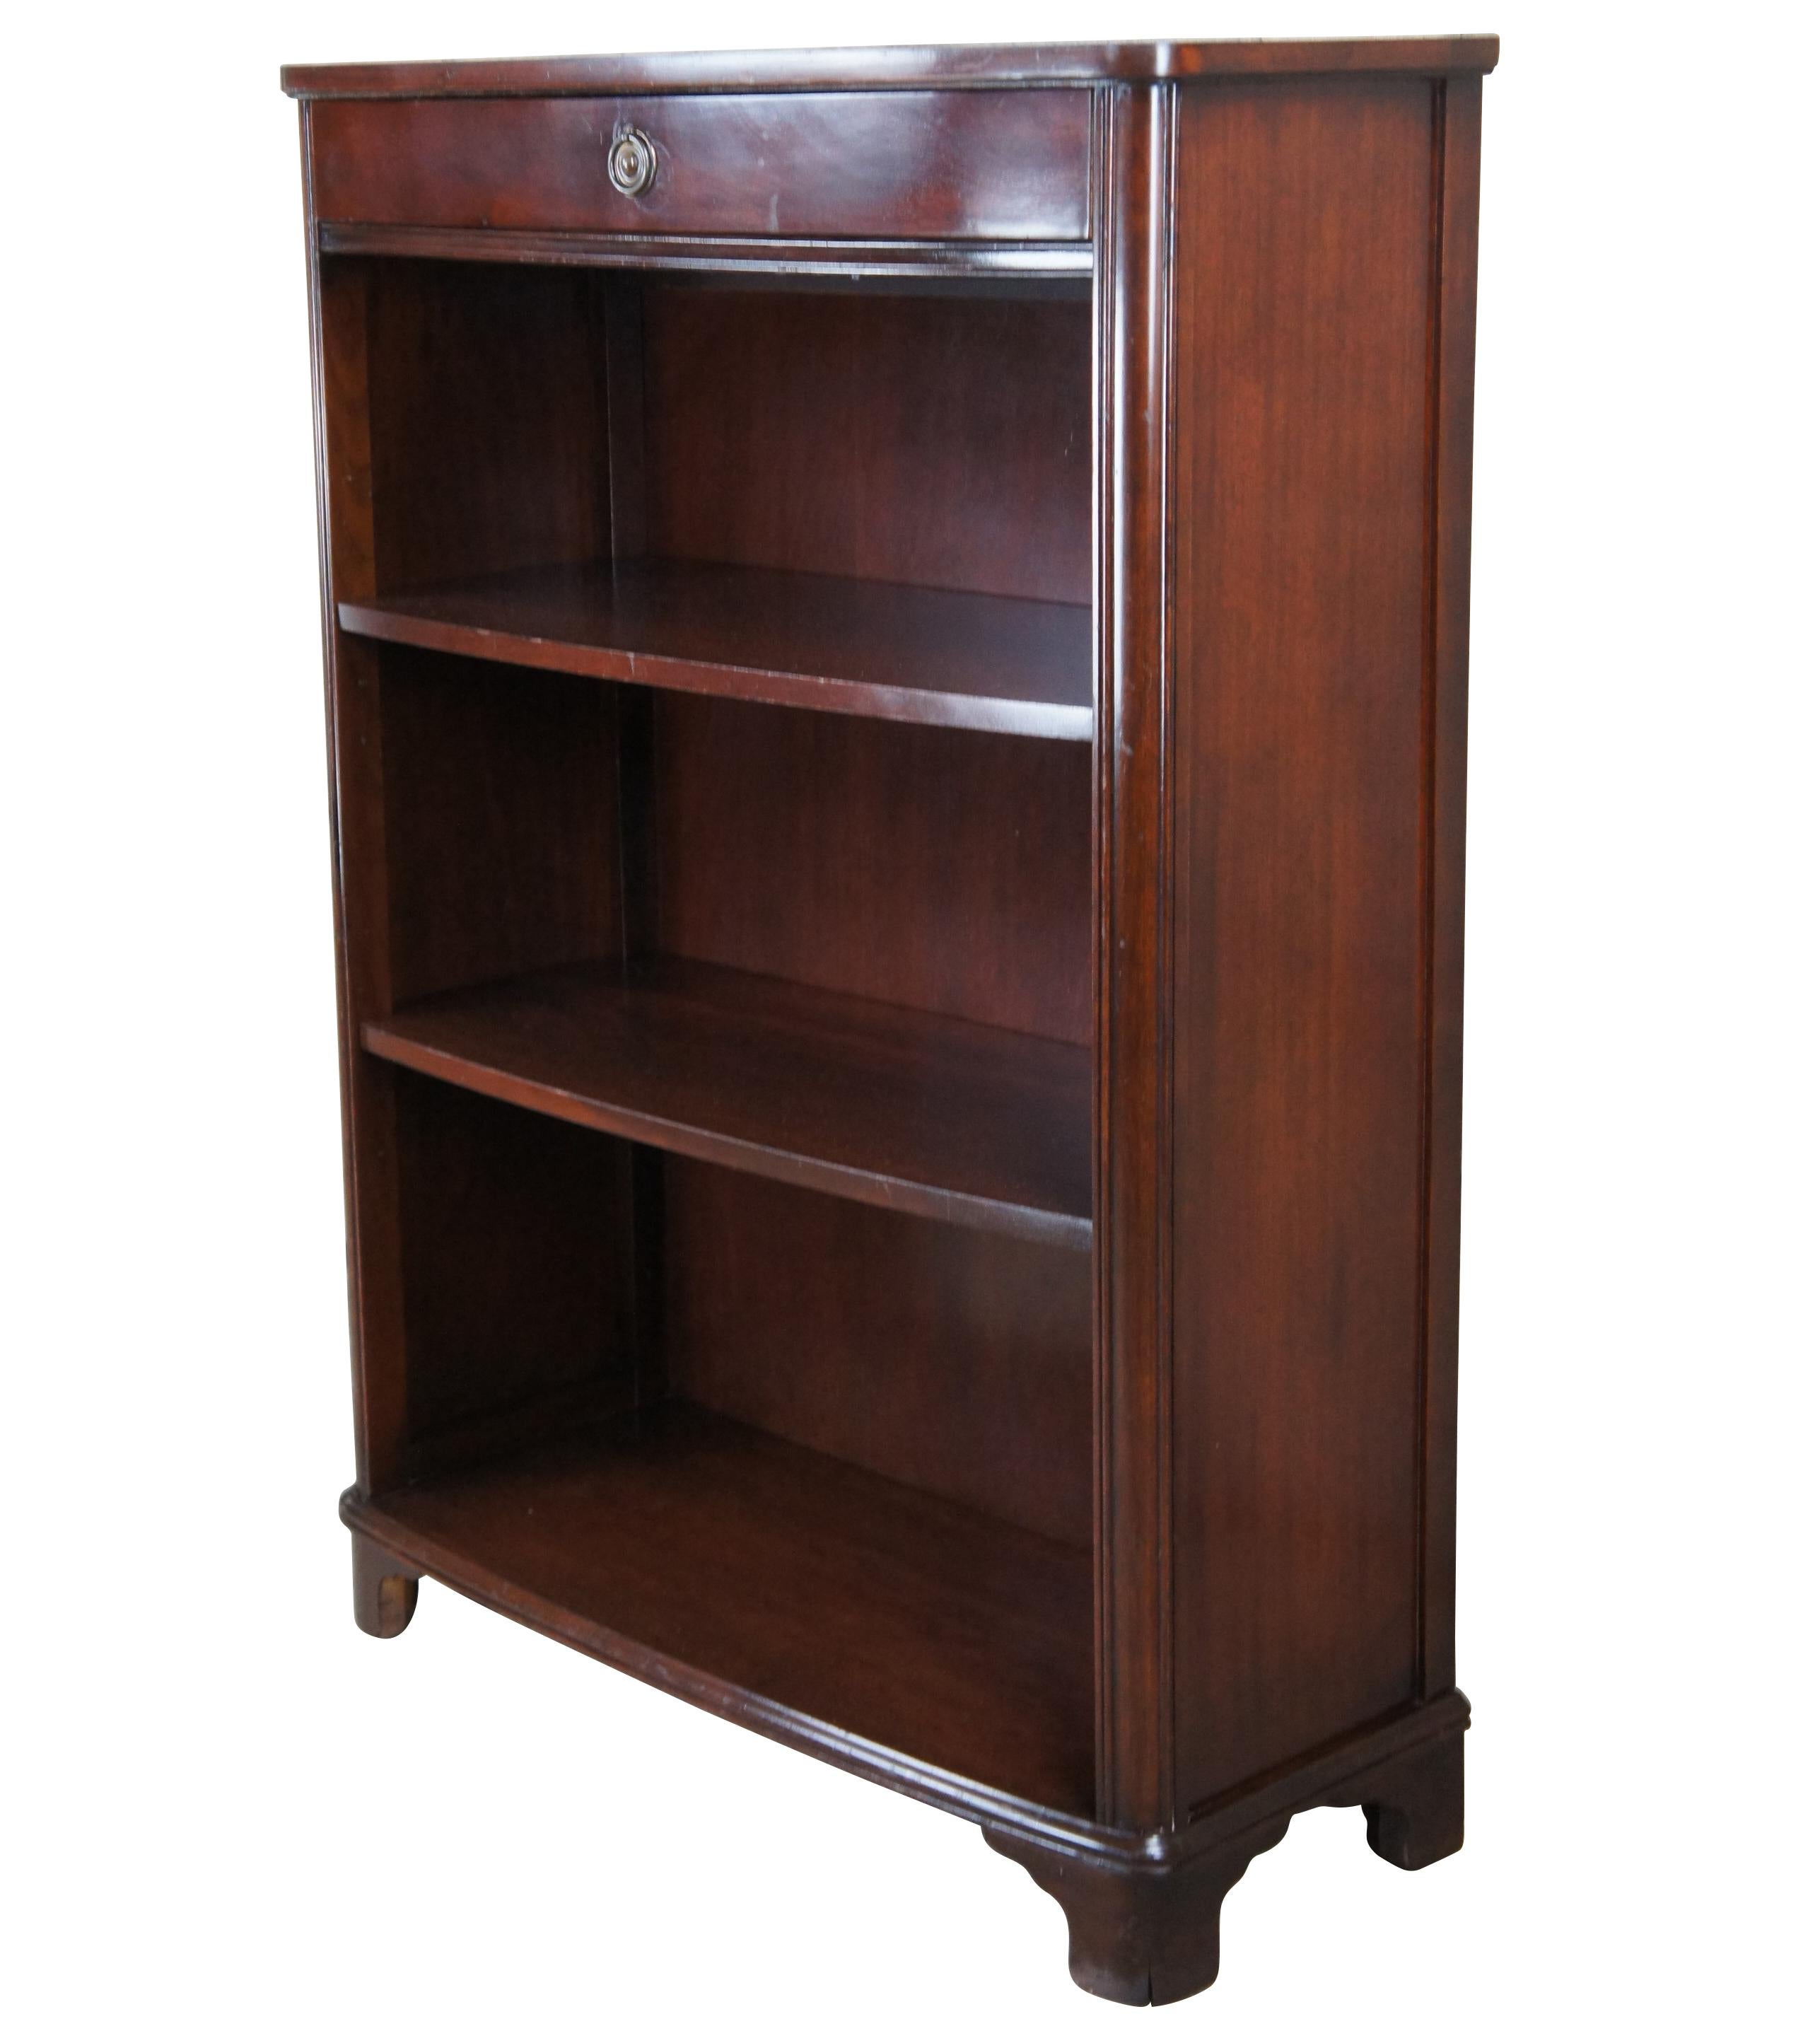 Sligh-Lowry petite mahogany bookcase or console, circa 1960s. Features a petite rectangular form with two adjustable shelves and an upper dovetailed drawer with a brass sheraton style pull. Great for use in an entryway, living room or library.